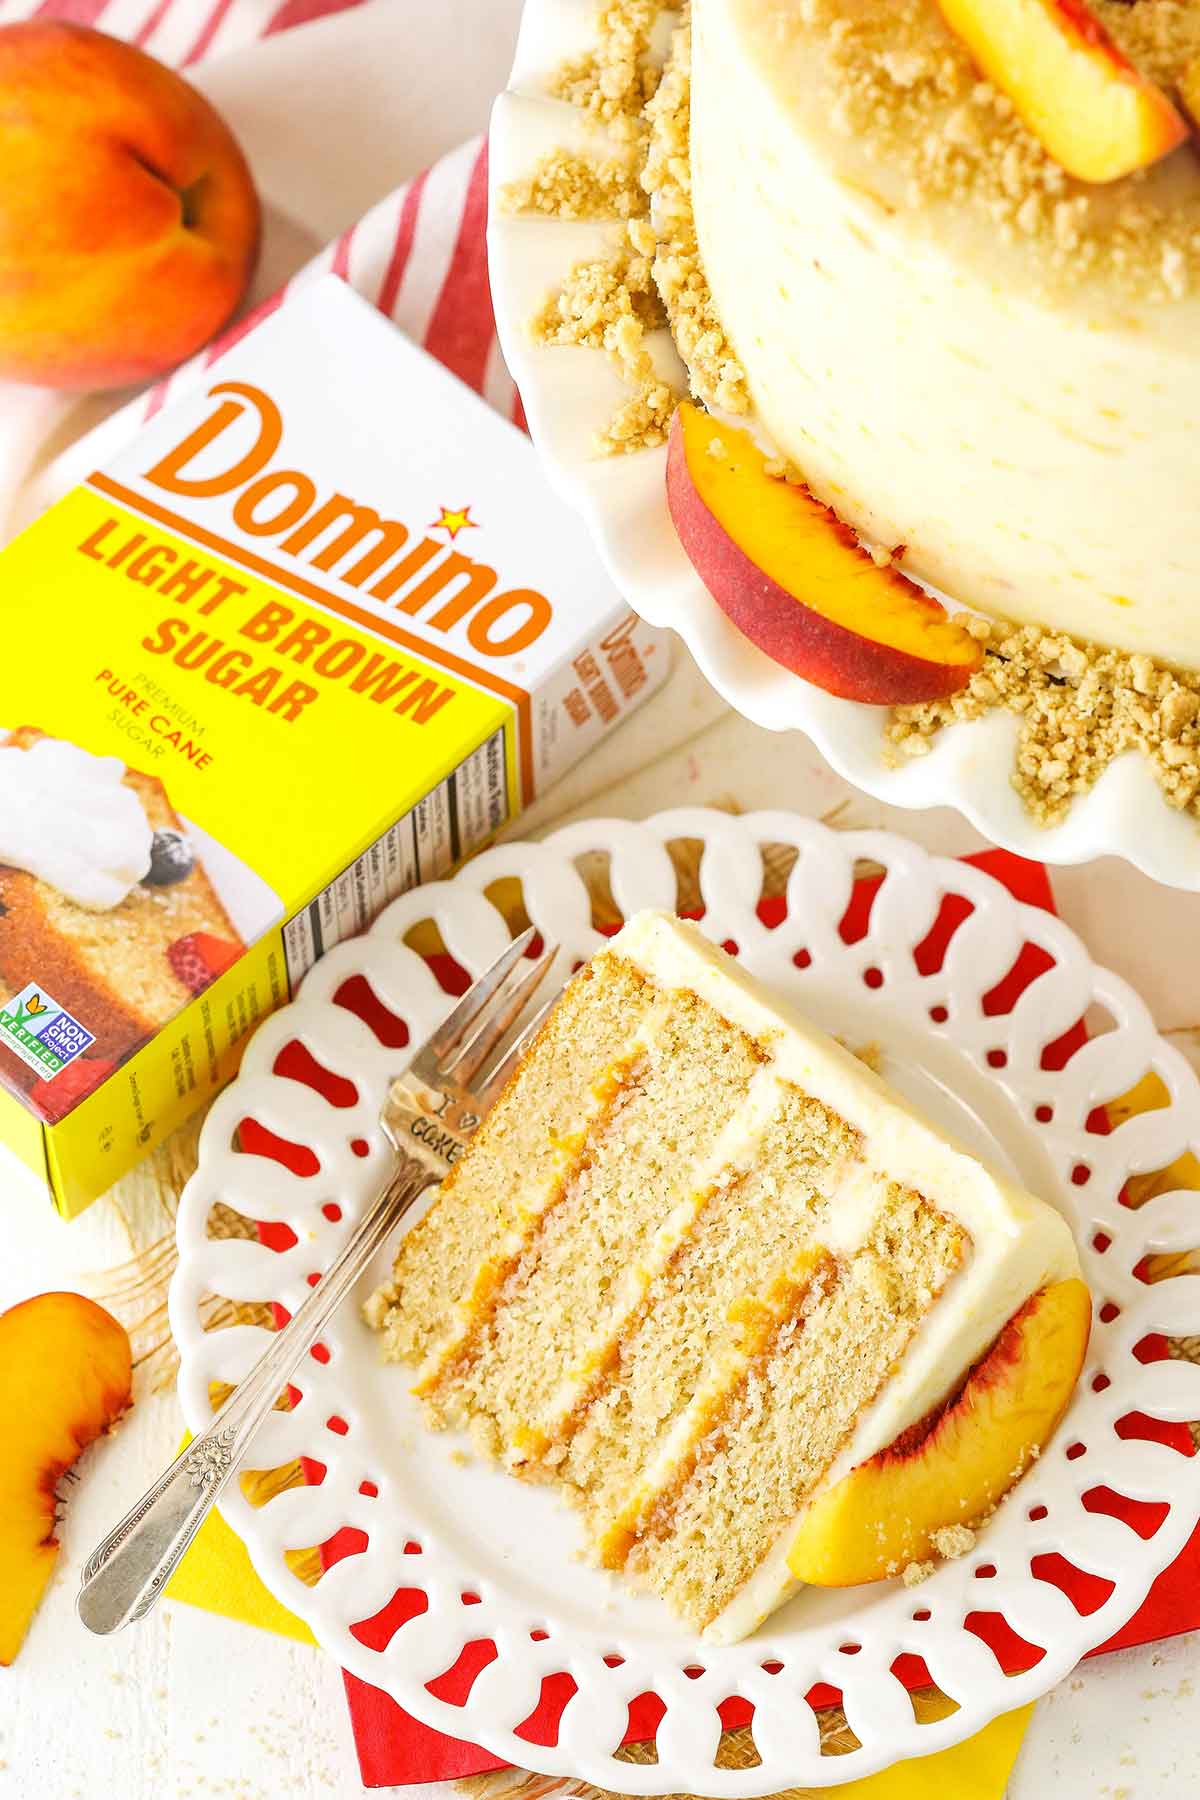 A slice of Brown Sugar Layer Cake With Peach Filling on a white plate next to a box of Domino Sugar